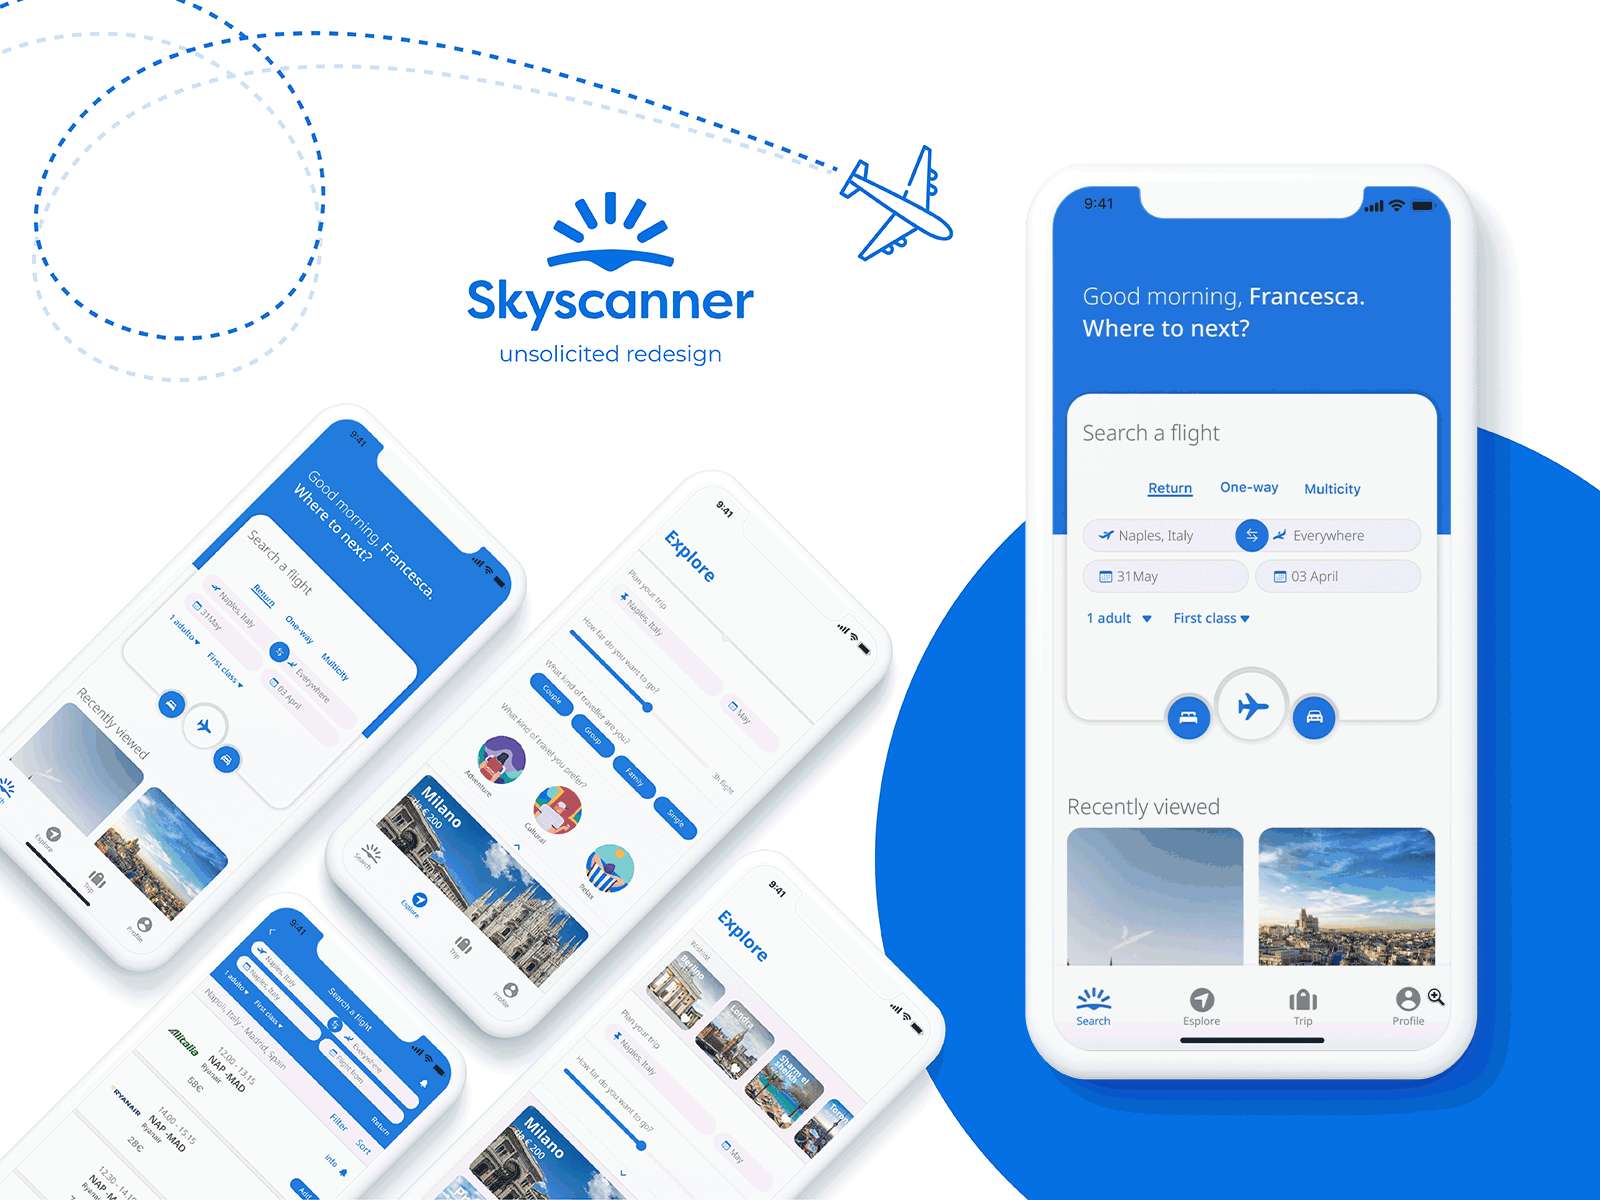 Skyscanner - unsolicited redesign apple apple design design interfacedesign project redesign redesignapp skyscanner uiux userflow